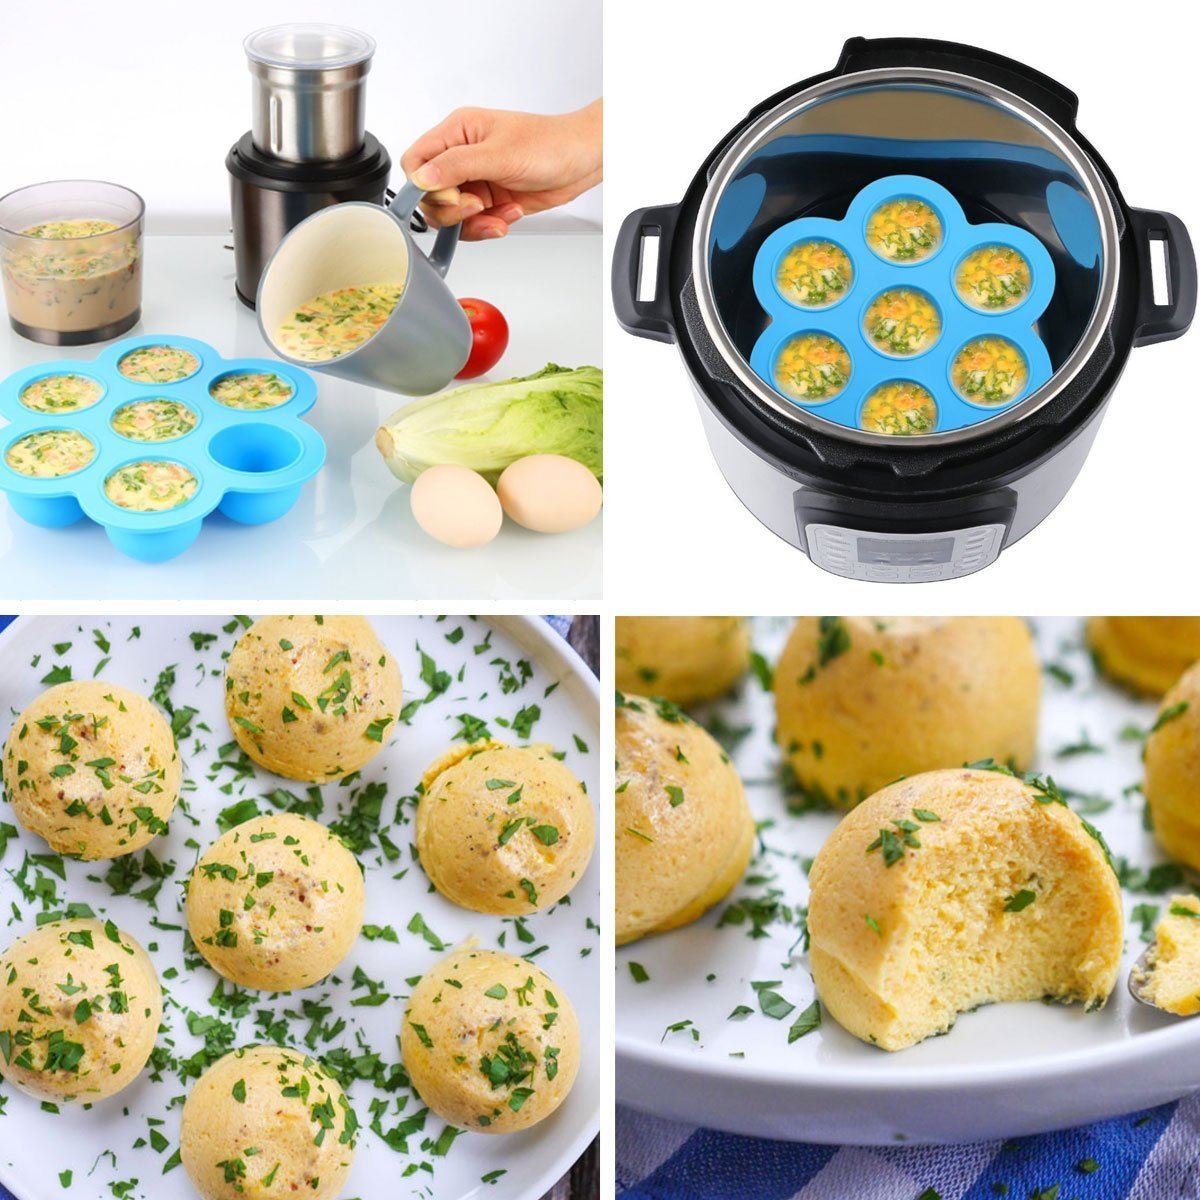 http://www.coralov.com/content/images/thumbs/0000697_silicone-egg-bites-molds-for-instant-pot-accessories-fits-568-qt-pressure-cooker-microwave-oven-refr.jpeg